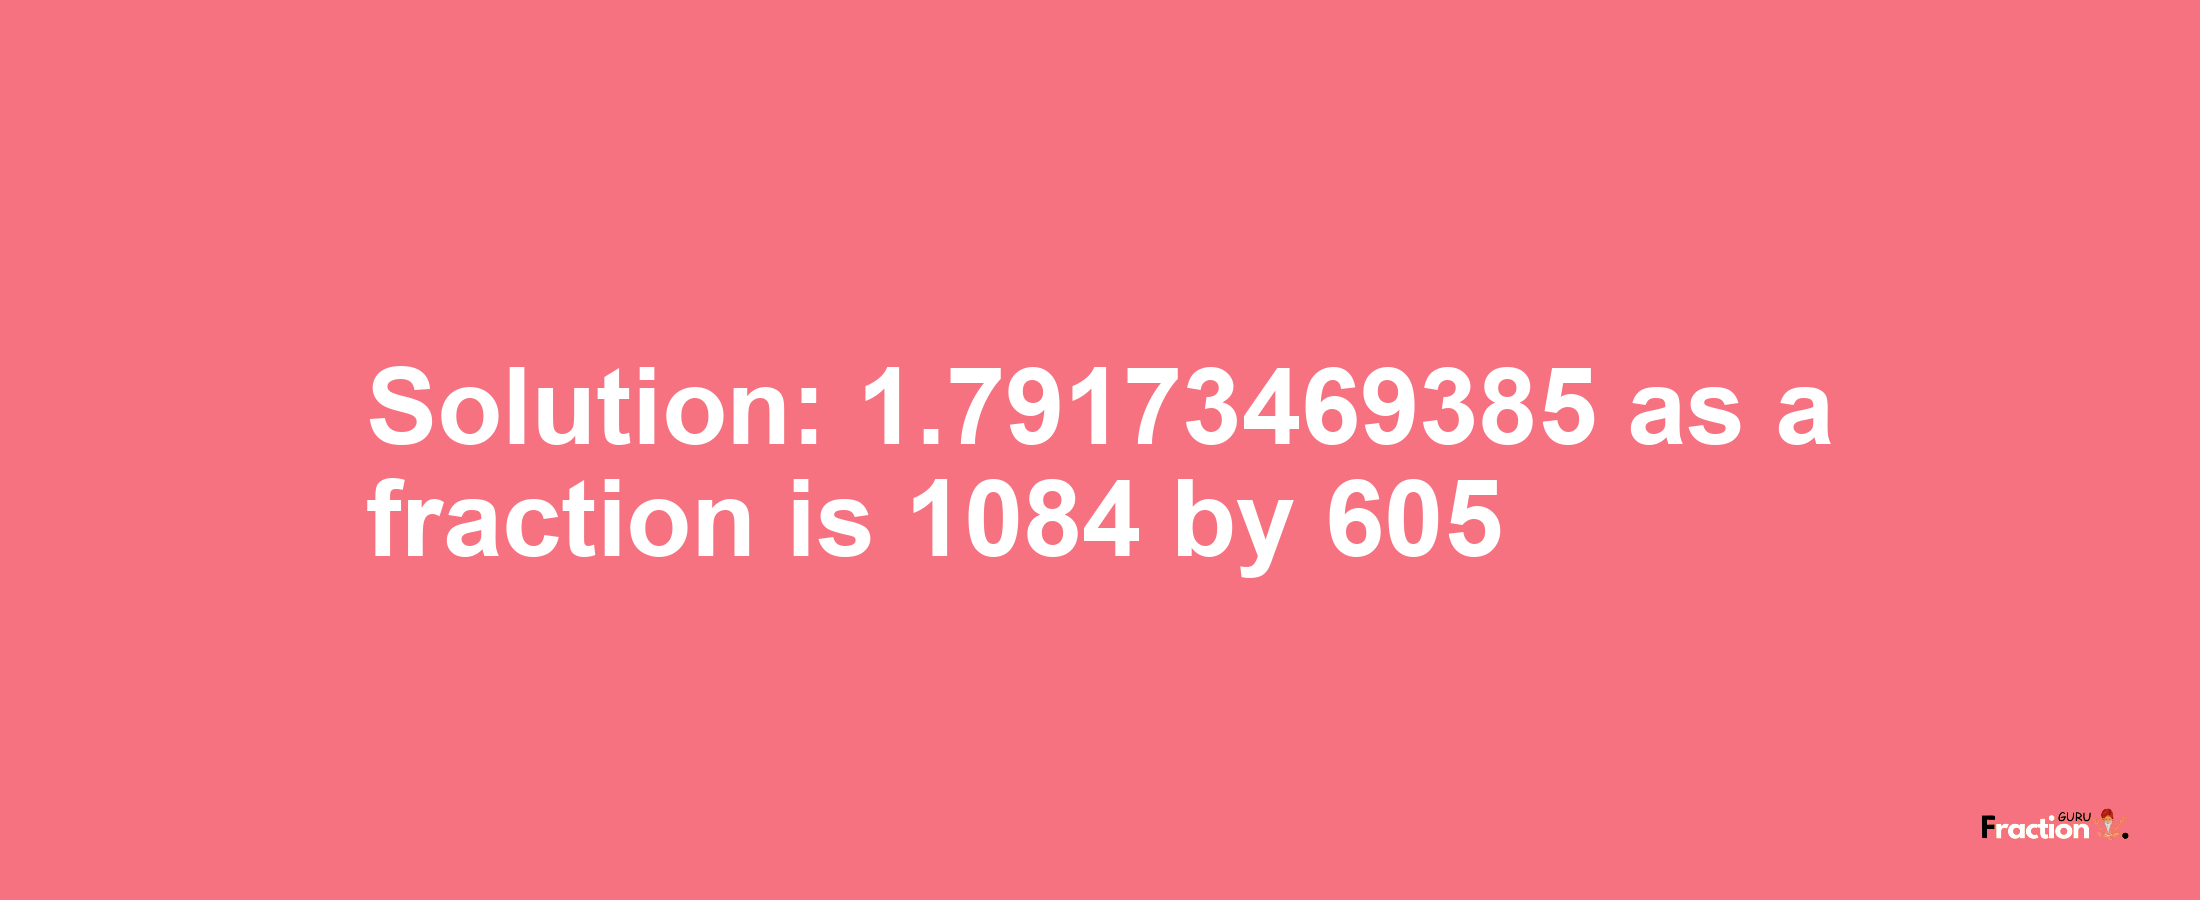 Solution:1.79173469385 as a fraction is 1084/605